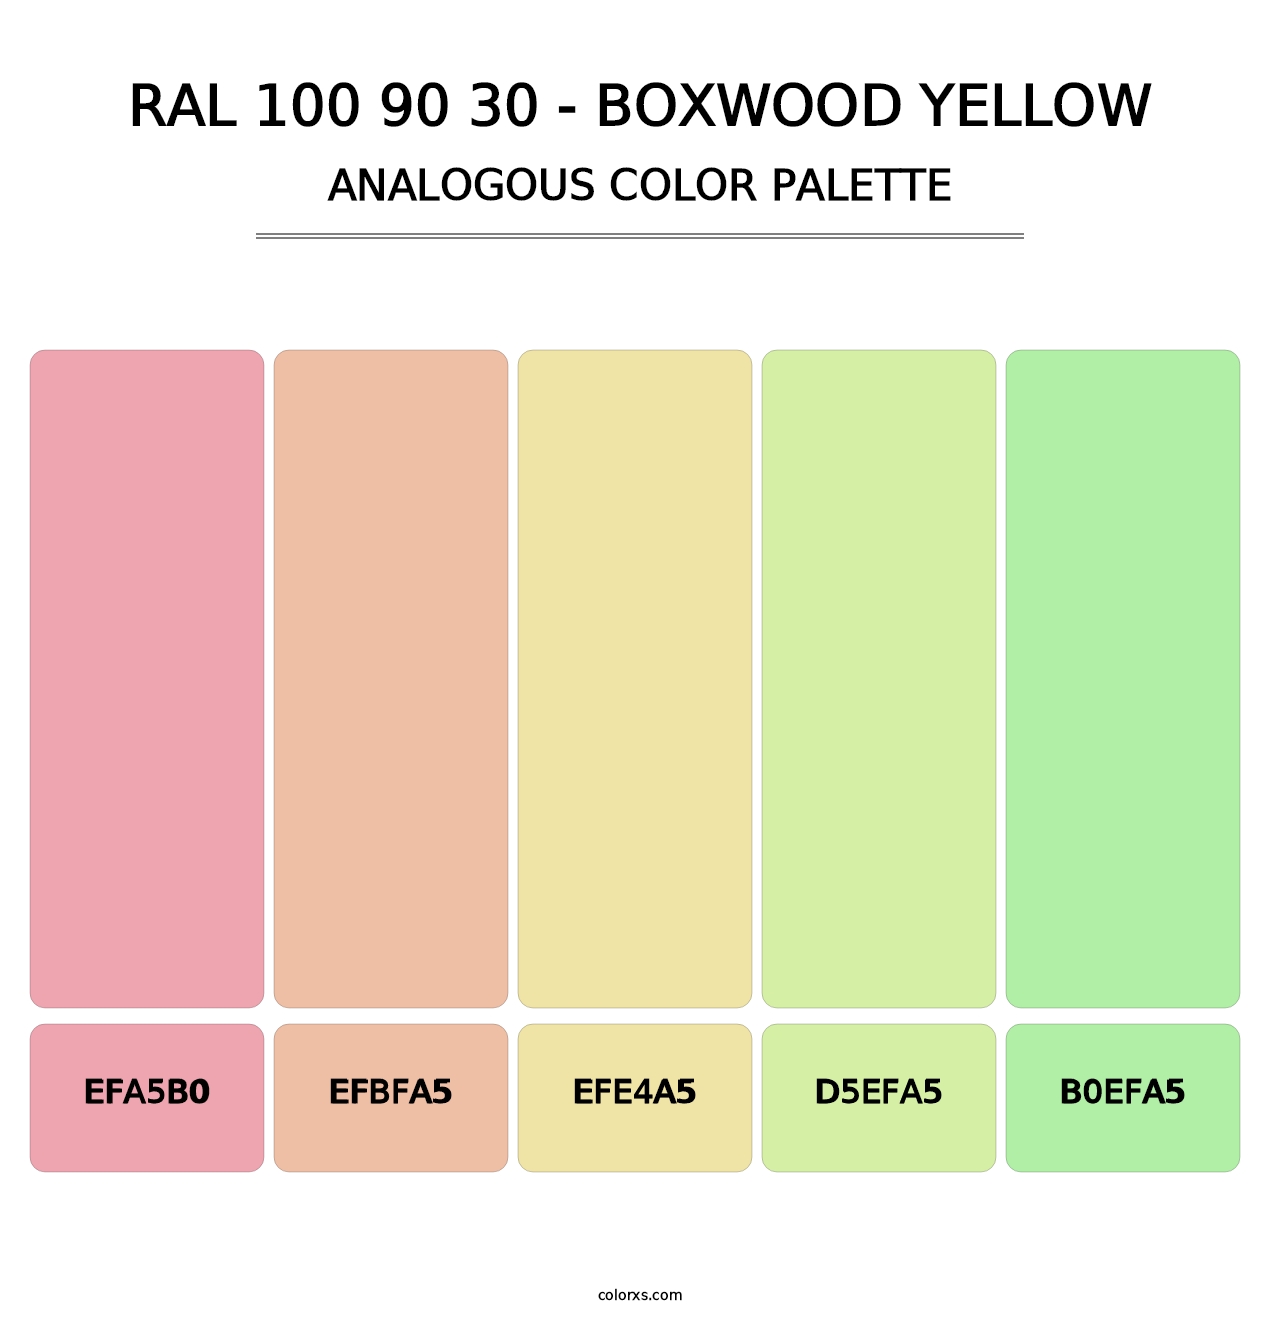 RAL 100 90 30 - Boxwood Yellow - Analogous Color Palette